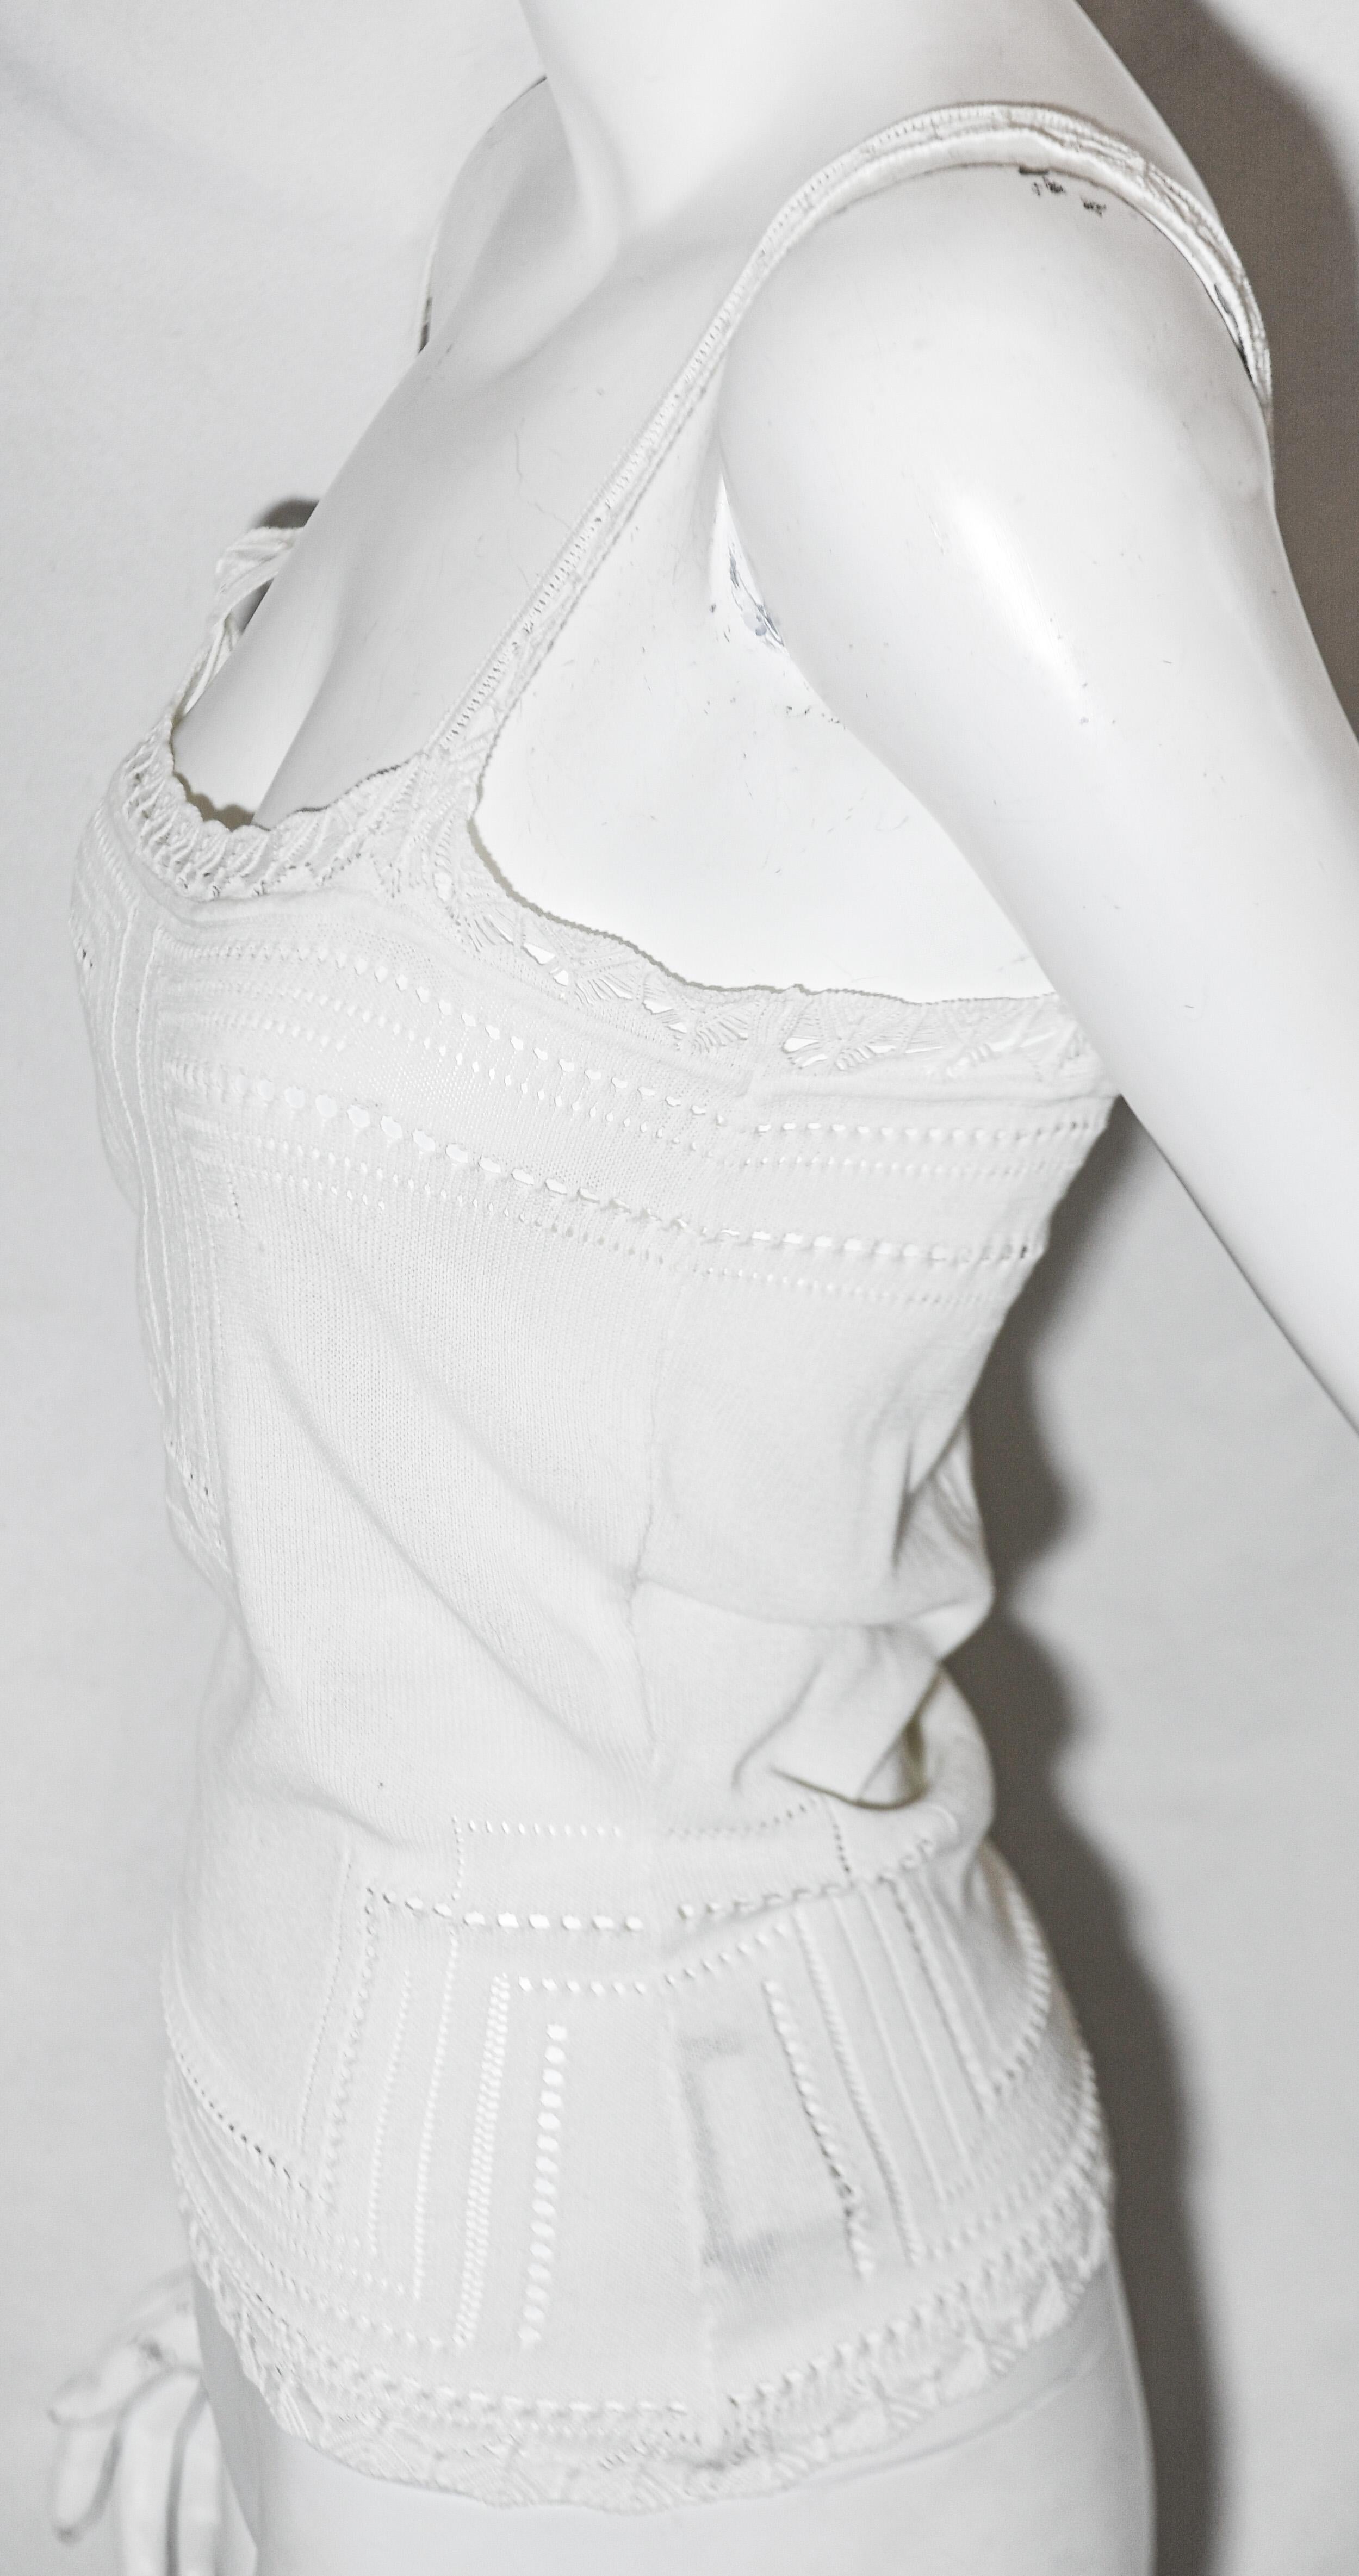 Christian Dior white cotton crochet knit camisole can be worn by itself with a pair of jeans or it can be worn under  a jacket, but why cover such a beautiful top! This top has a geometric peek a boo design throughout trimmed with a scalloped border